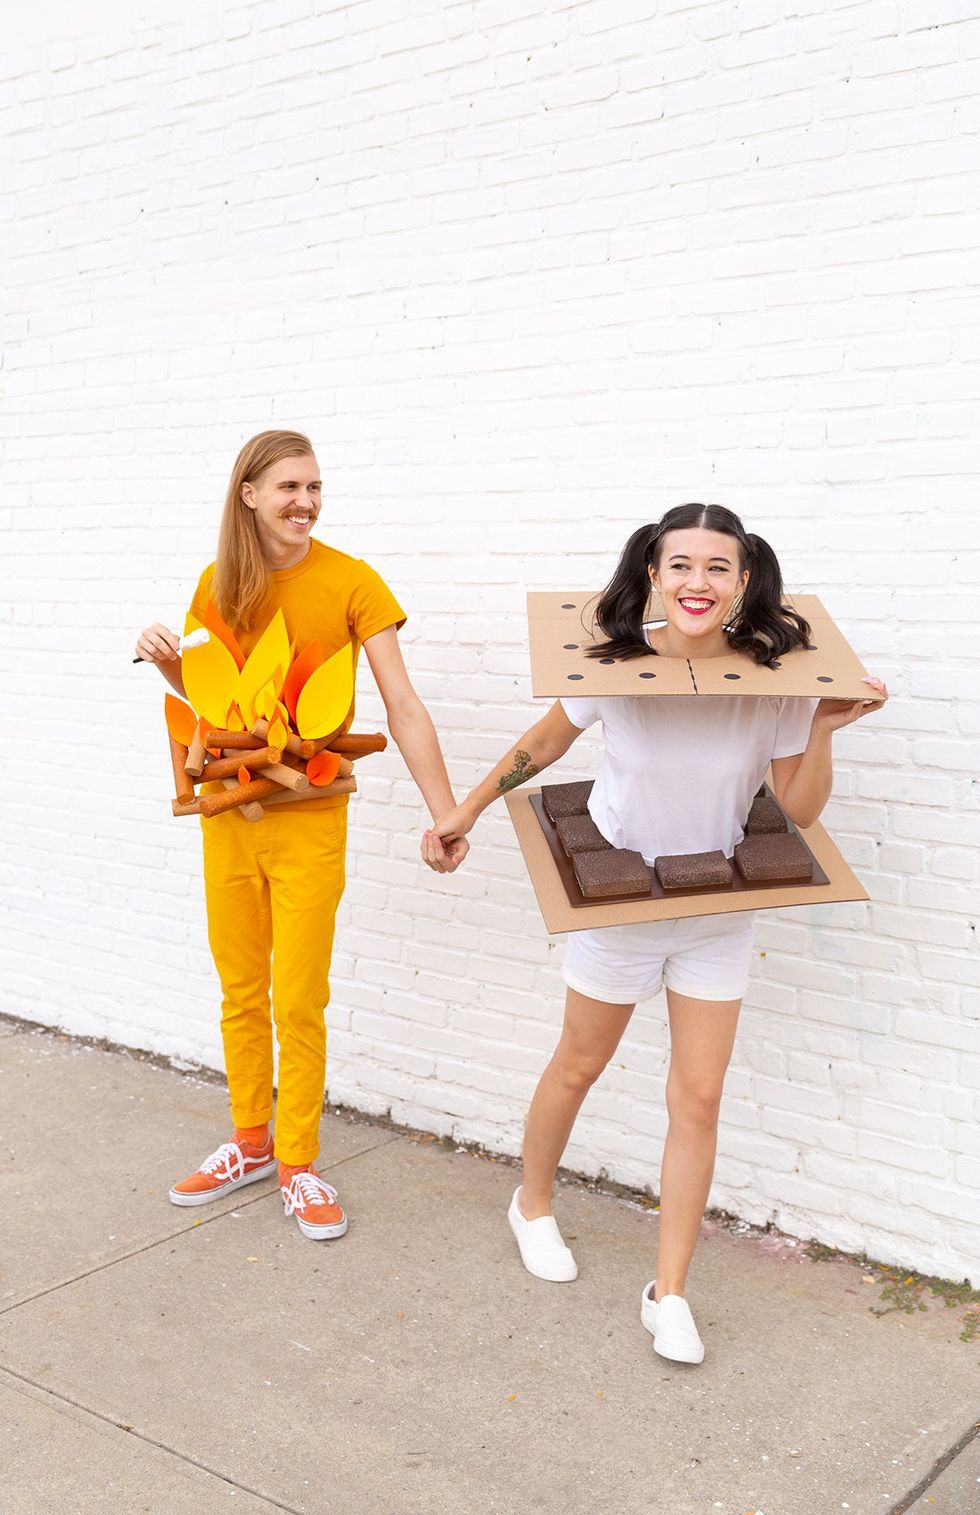 S'mores and fire costumes